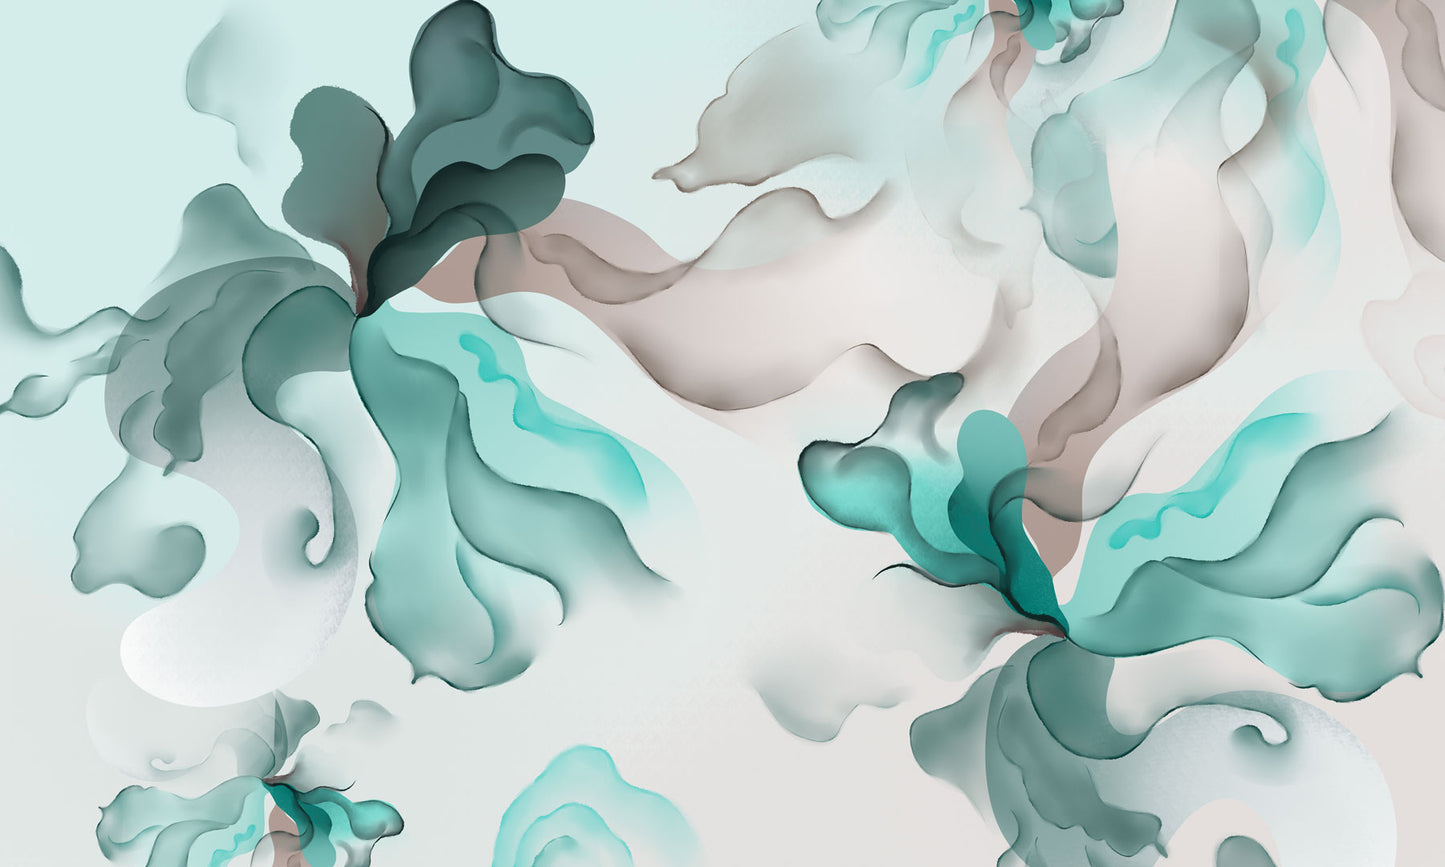 Abstract Teal Watercolor Floral Mural Wallpaper